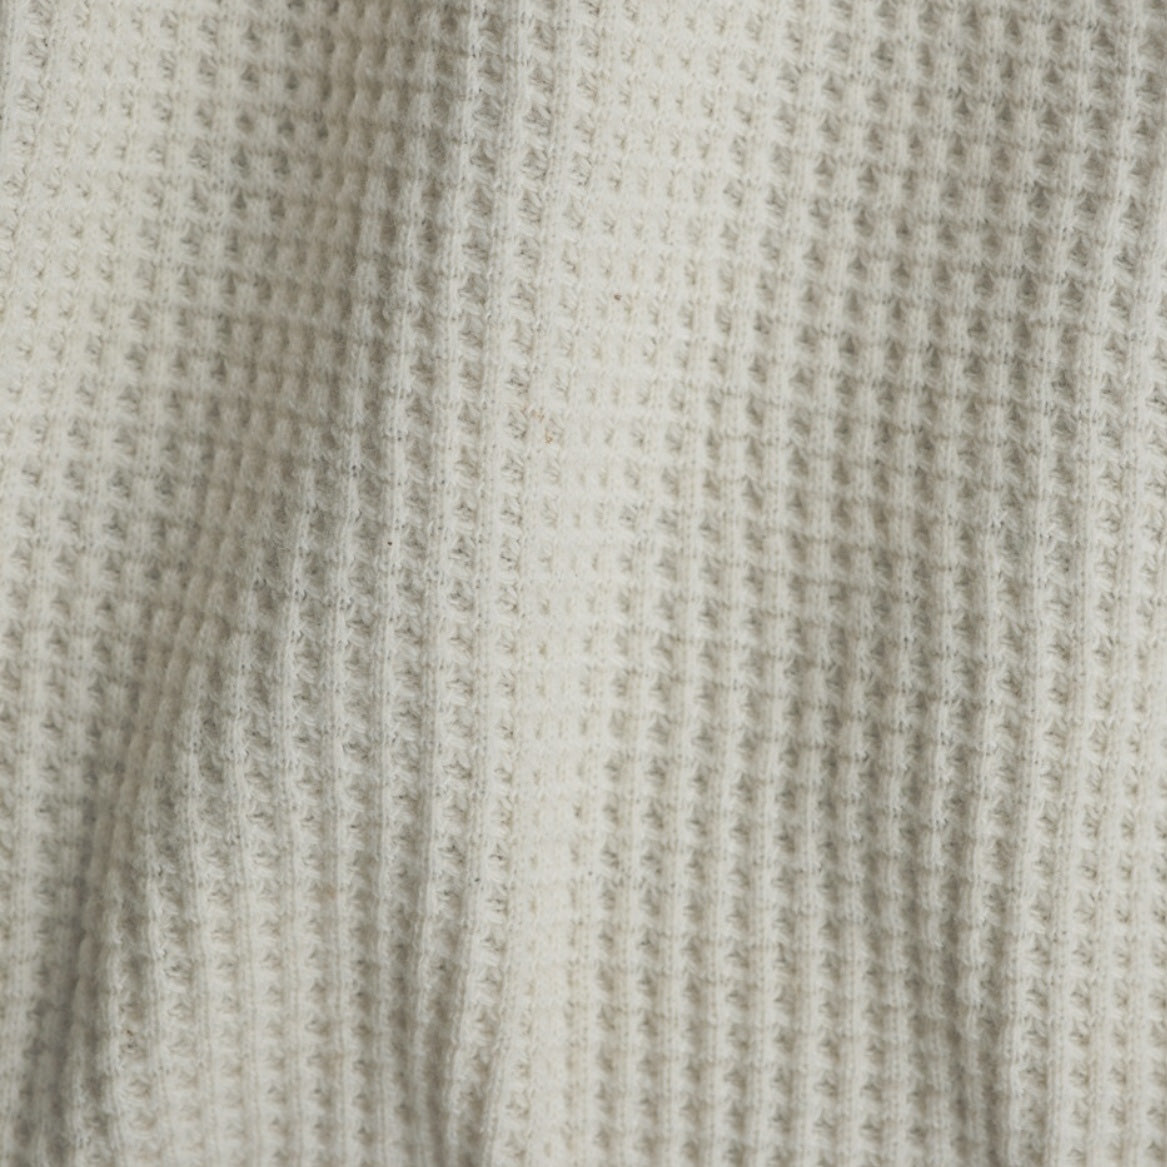 Sample Swatch | Heavyweight Thermal | Natural Undyed